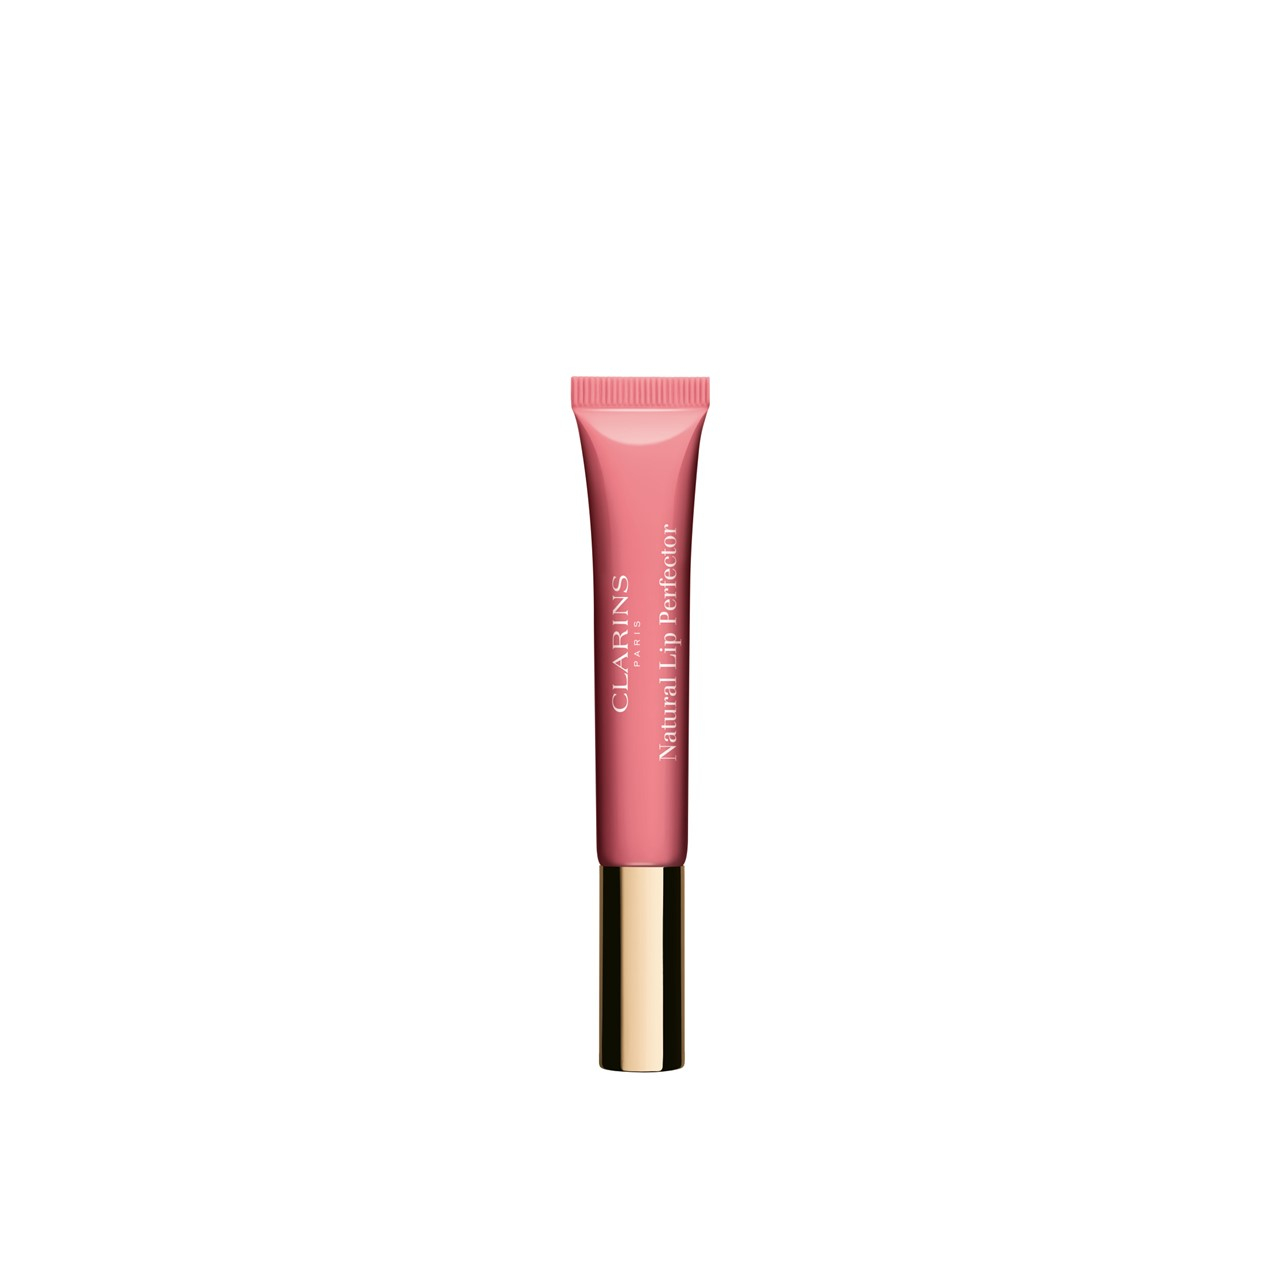 Best Clarins products: Clarins Natural Lip Perfector 01 Rose Shimmer